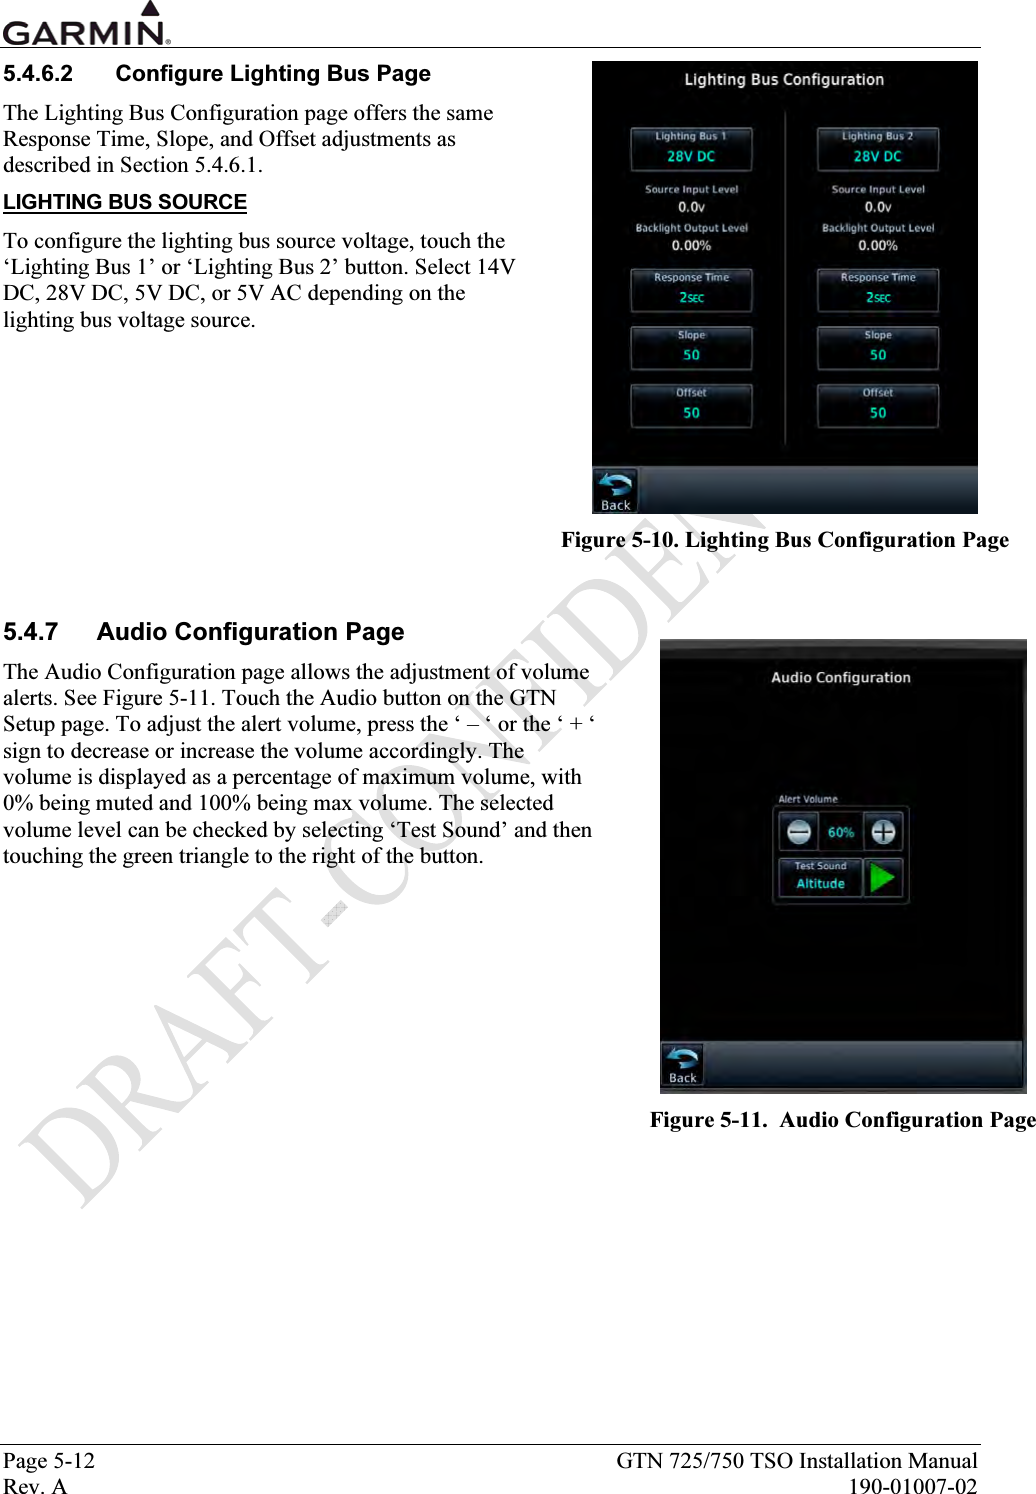  Page 5-12  GTN 725/750 TSO Installation Manual Rev. A  190-01007-02 5.4.6.2  Configure Lighting Bus Page The Lighting Bus Configuration page offers the same Response Time, Slope, and Offset adjustments as described in Section 5.4.6.1.  LIGHTING BUS SOURCE To configure the lighting bus source voltage, touch the ‘Lighting Bus 1’ or ‘Lighting Bus 2’ button. Select 14V DC, 28V DC, 5V DC, or 5V AC depending on the lighting bus voltage source.        5.4.7 Audio Configuration Page The Audio Configuration page allows the adjustment of volume alerts. See Figure 5-11. Touch the Audio button on the GTN Setup page. To adjust the alert volume, press the ‘ – ‘ or the ‘ + ‘ sign to decrease or increase the volume accordingly. The volume is displayed as a percentage of maximum volume, with 0% being muted and 100% being max volume. The selected volume level can be checked by selecting ‘Test Sound’ and then touching the green triangle to the right of the button.    Figure 5-10. Lighting Bus Configuration Page  Figure 5-11.  Audio Configuration Page 